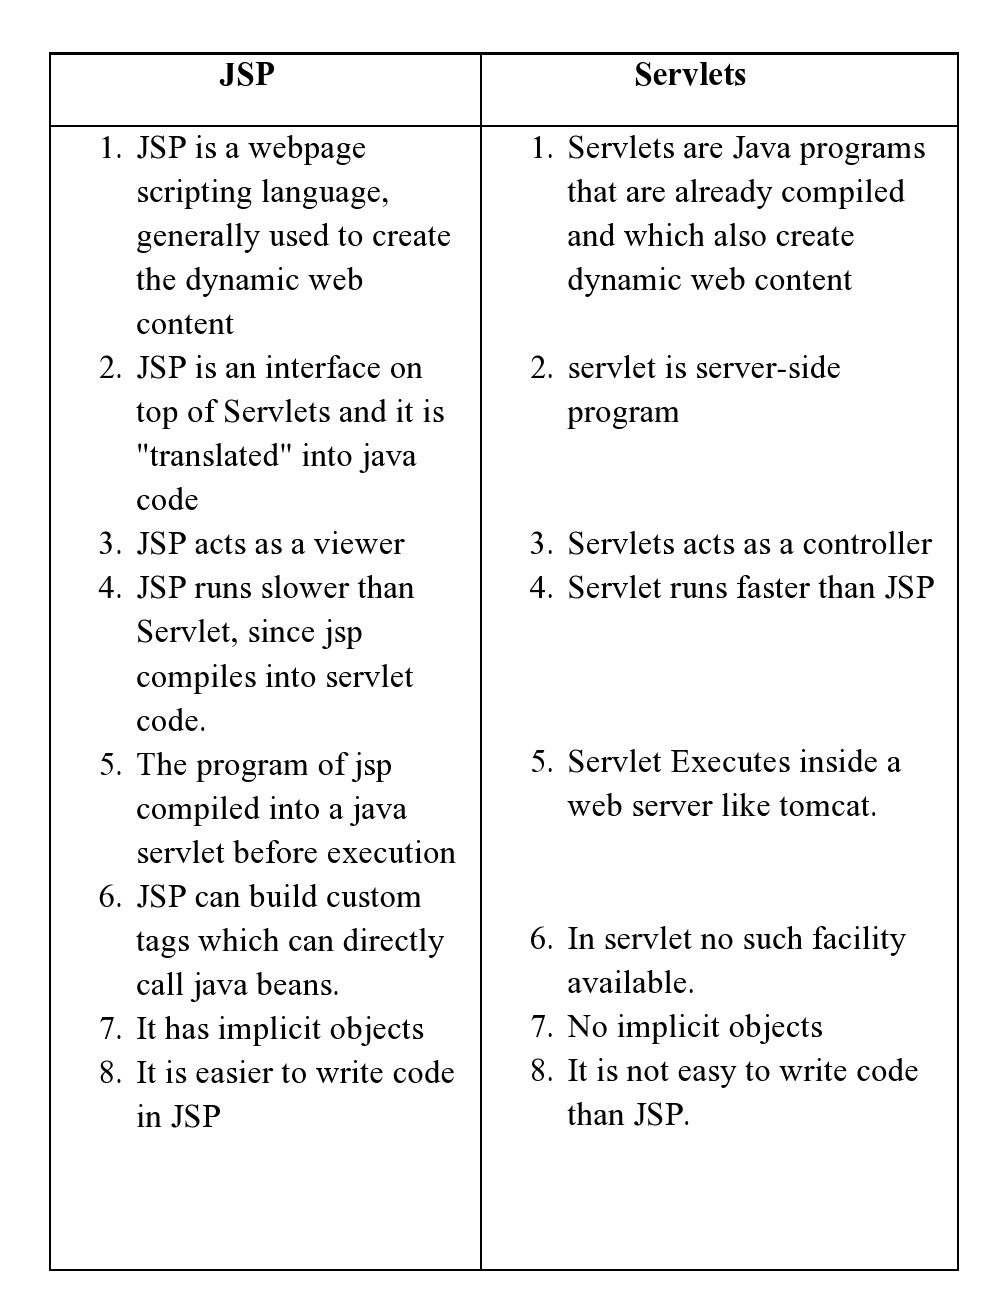 difference allying jsp and servlet when j2ee